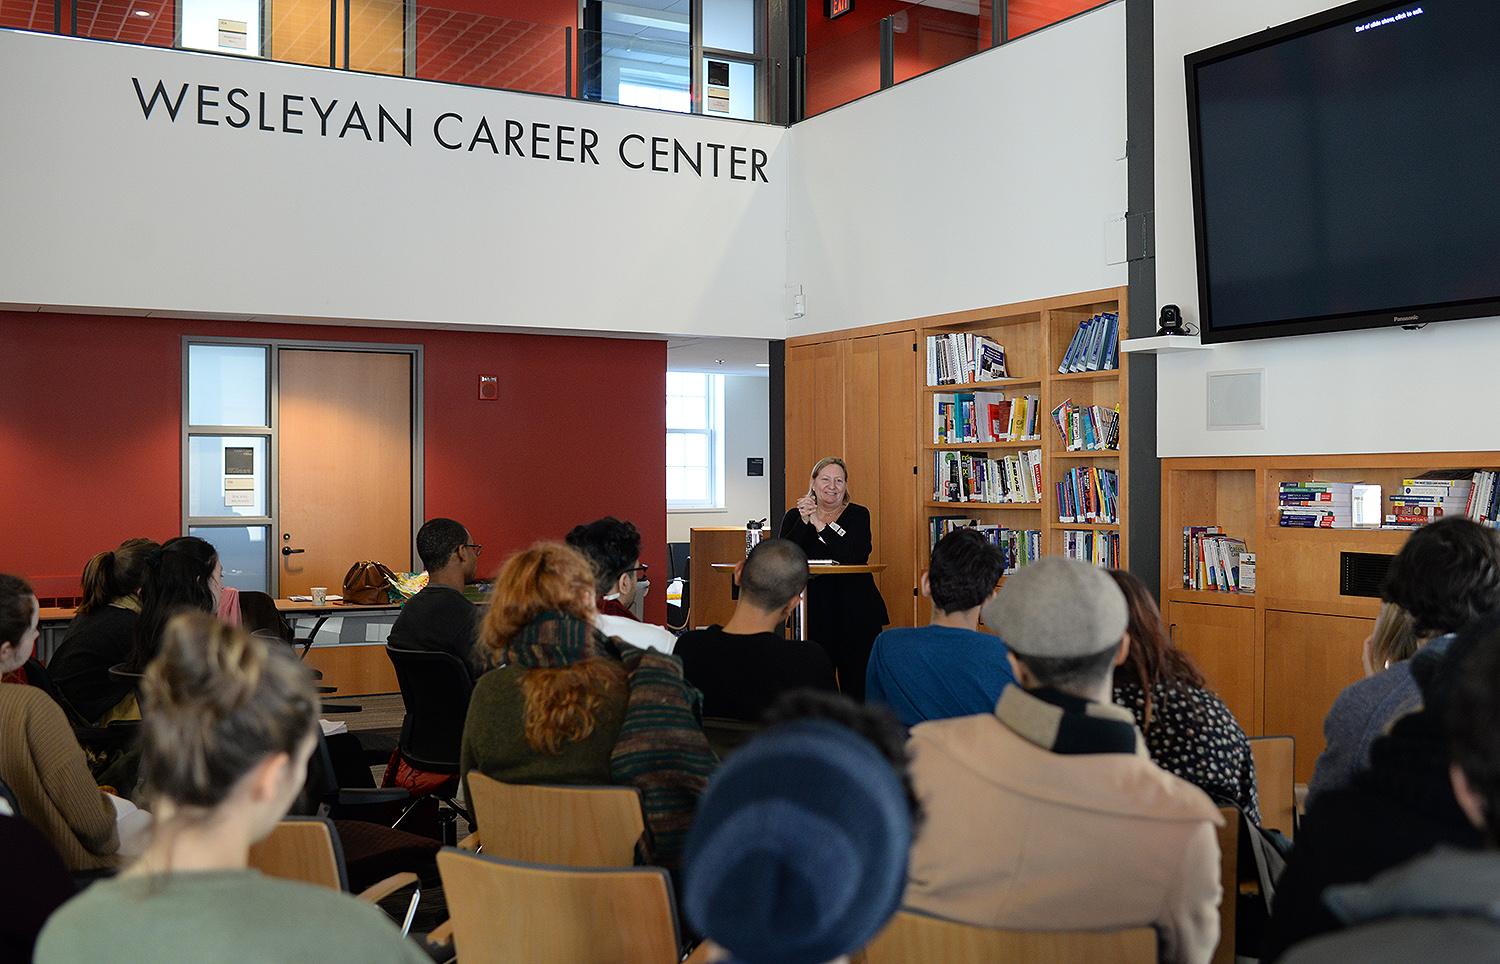 In collaboration with Alumni and Parent Relations, the Career Center invited several alumni to campus to speak on career-related topics during Winter on Wyllys. On Jan. 14, New York City Realtor/Broker Ann Biester Deane ’79, P’14, P'18, discussed the ins-and-outs of navigating the housing market as a first time renter or buyer.